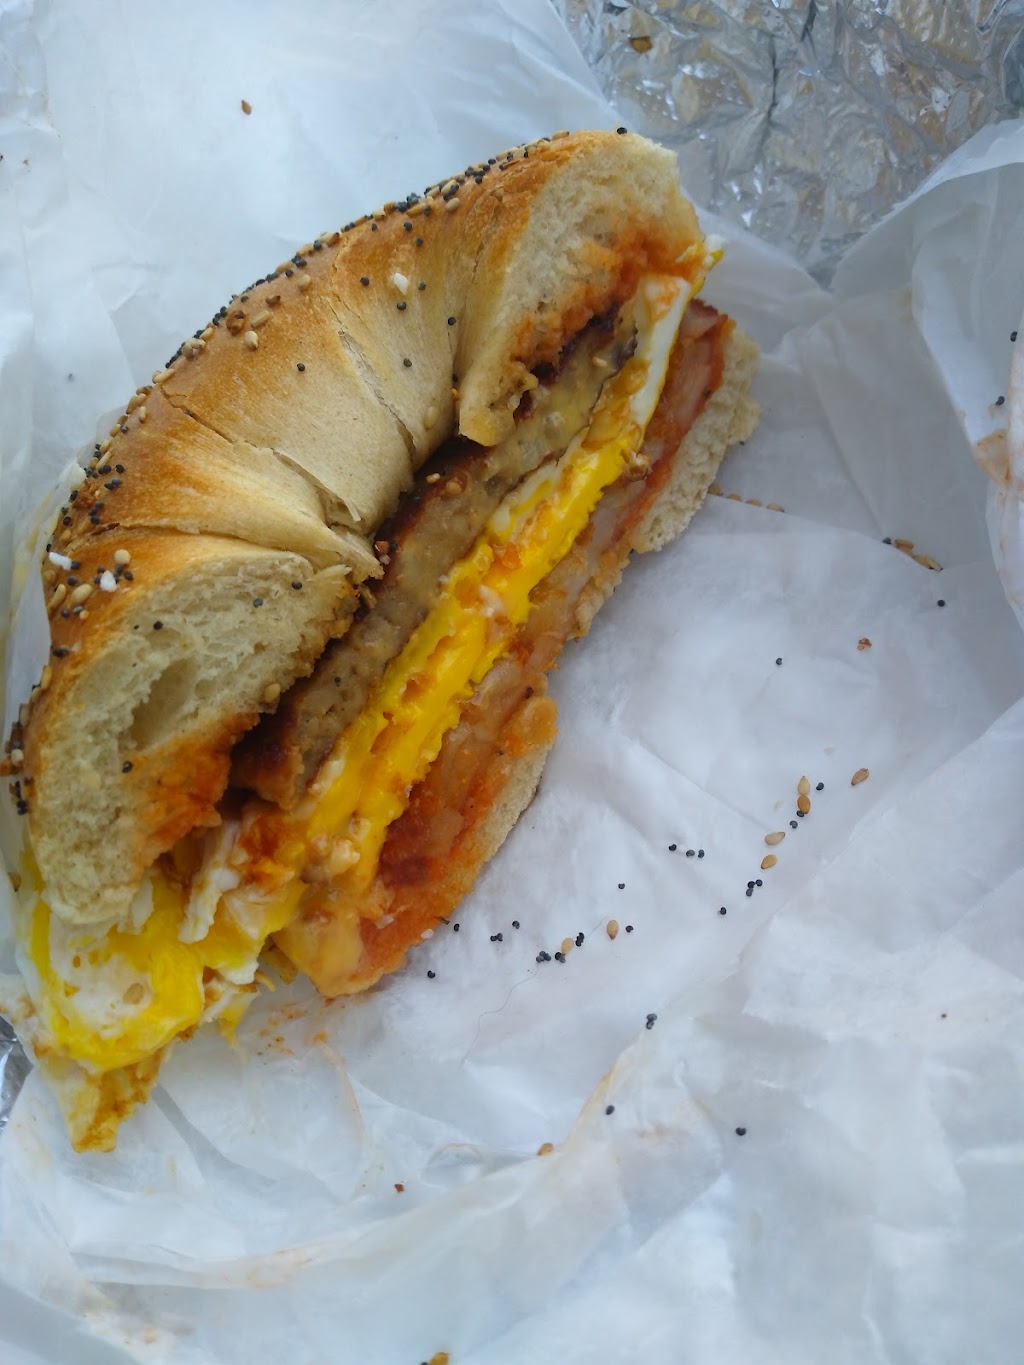 J&V bagels and deli | 1554 Paterson Plank Rd, Secaucus, NJ 07094 | Phone: (201) 330-0624